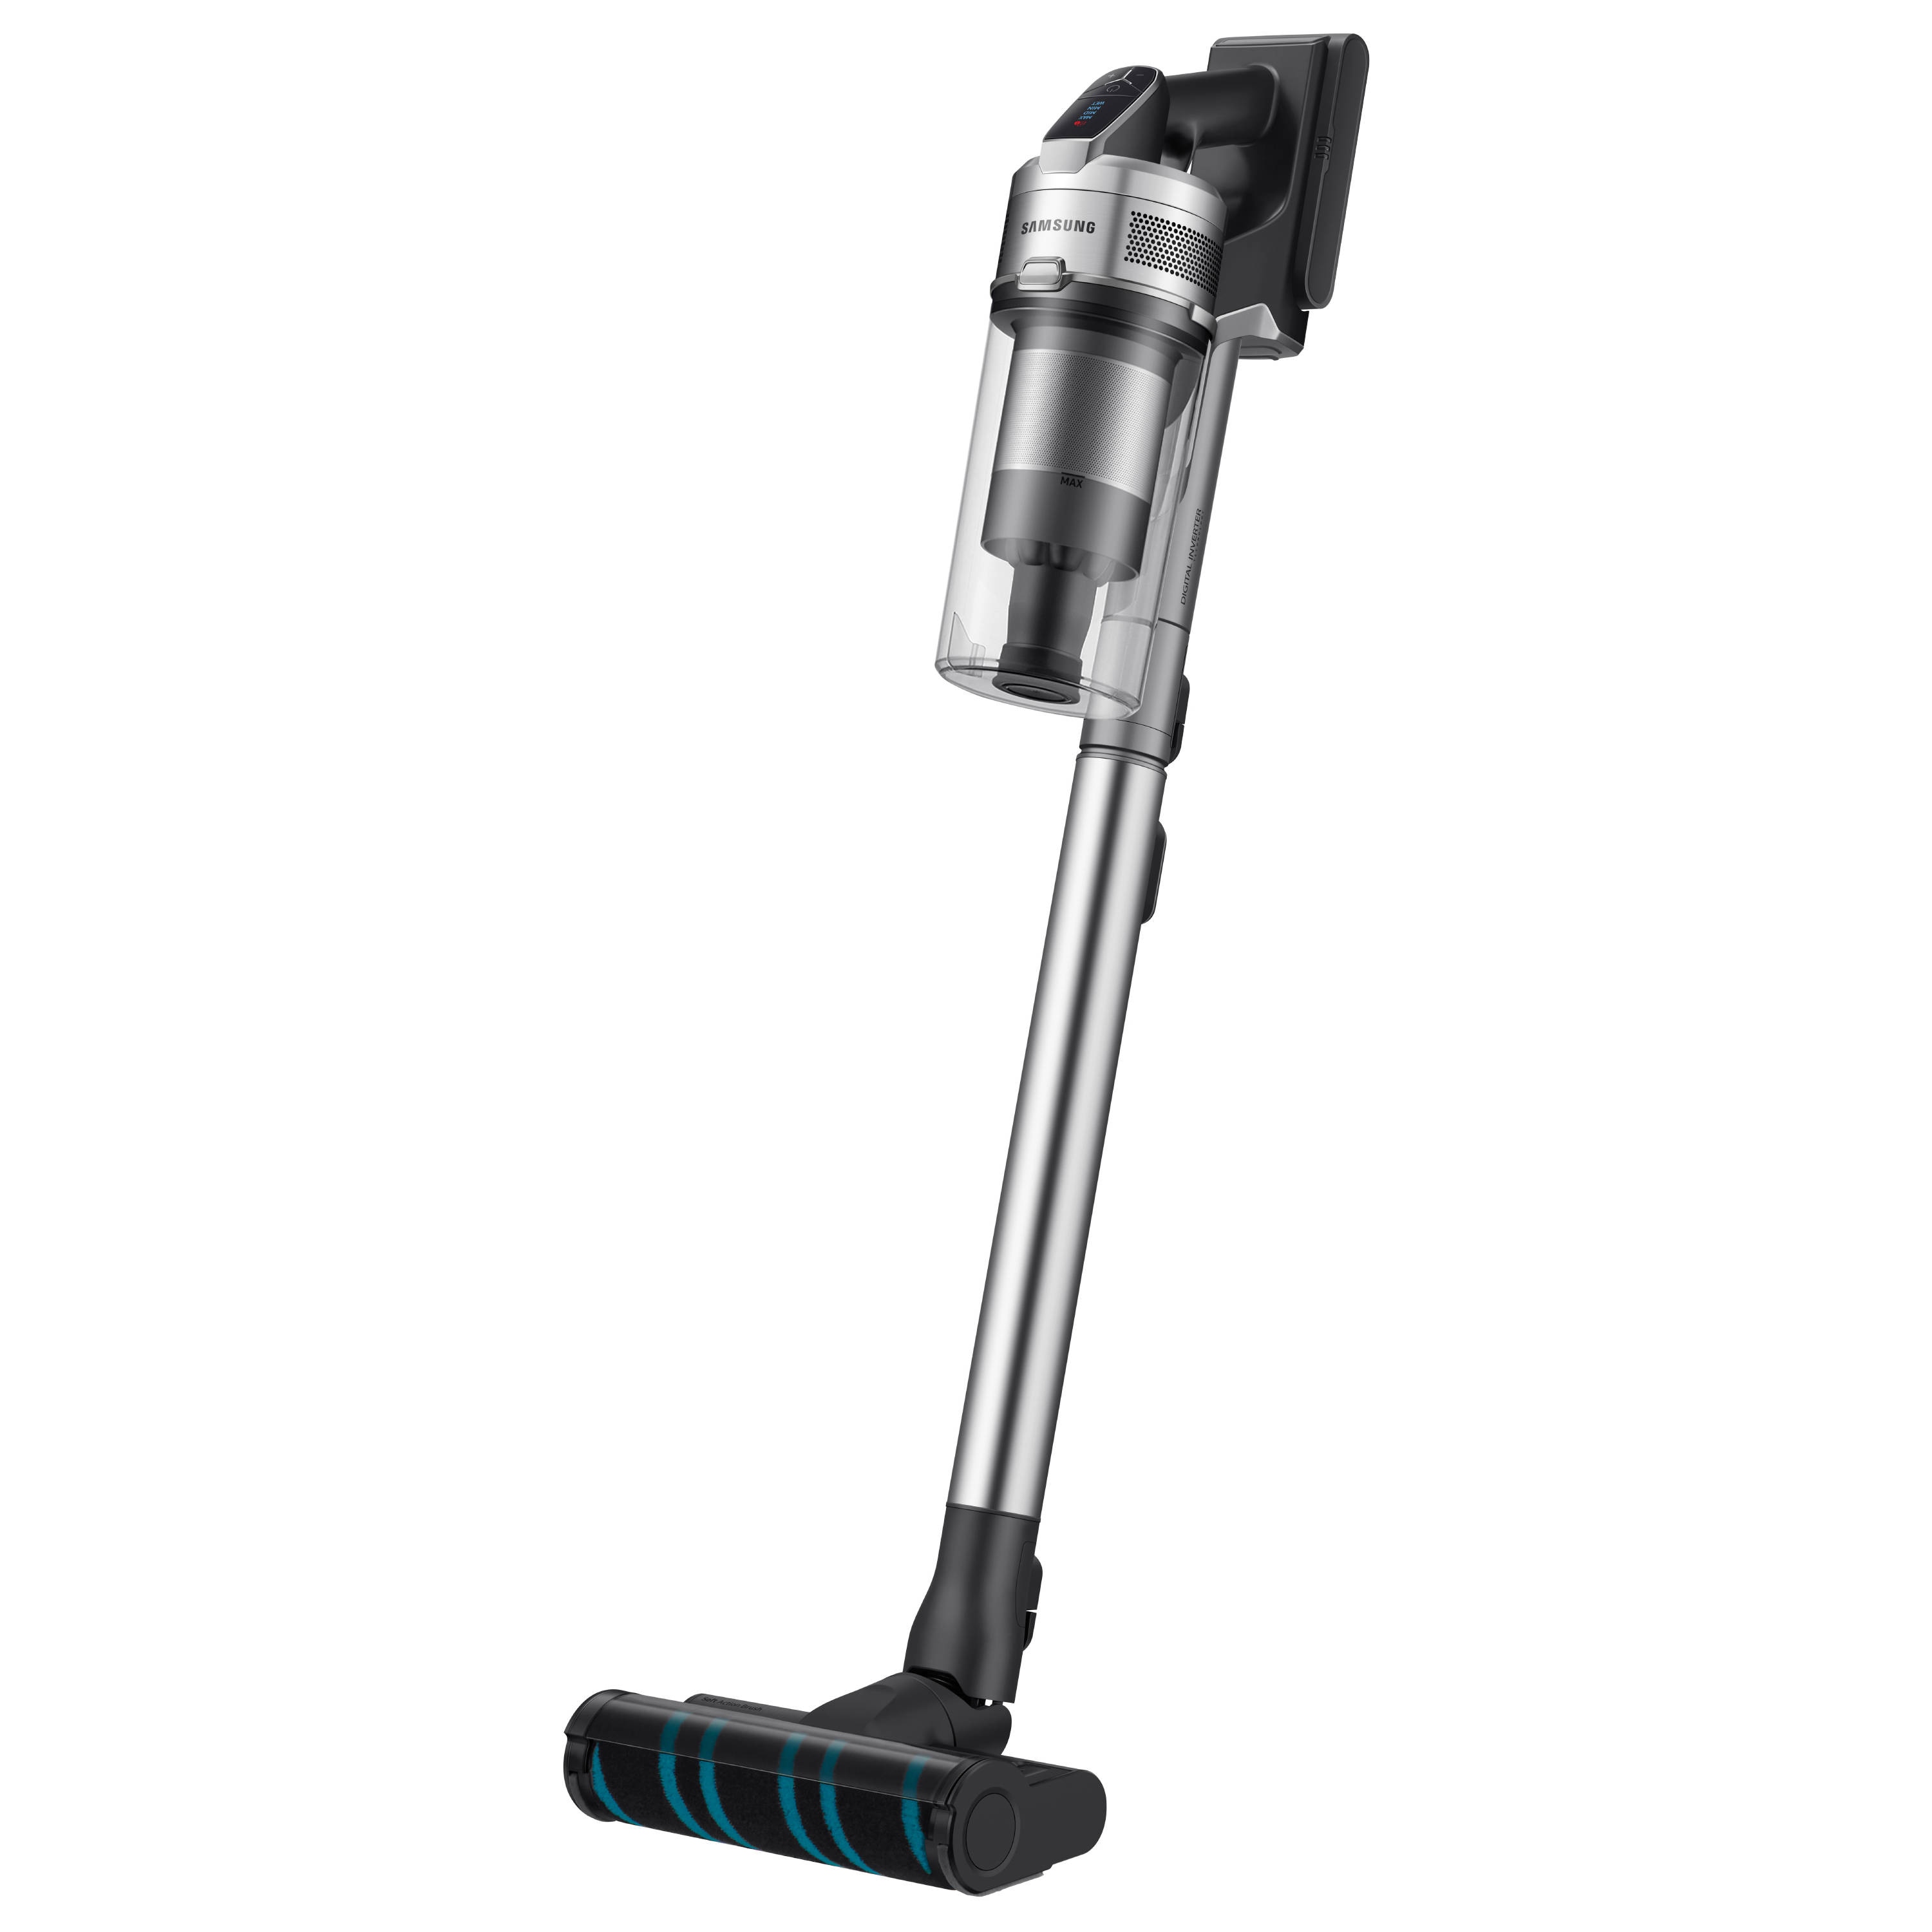 Samsung Jet 90 and Clean Vacuums To Stick the department Handheld) at Station in Vacuum 21.9 Stick (Convertible Cordless Pet Bundle Volt